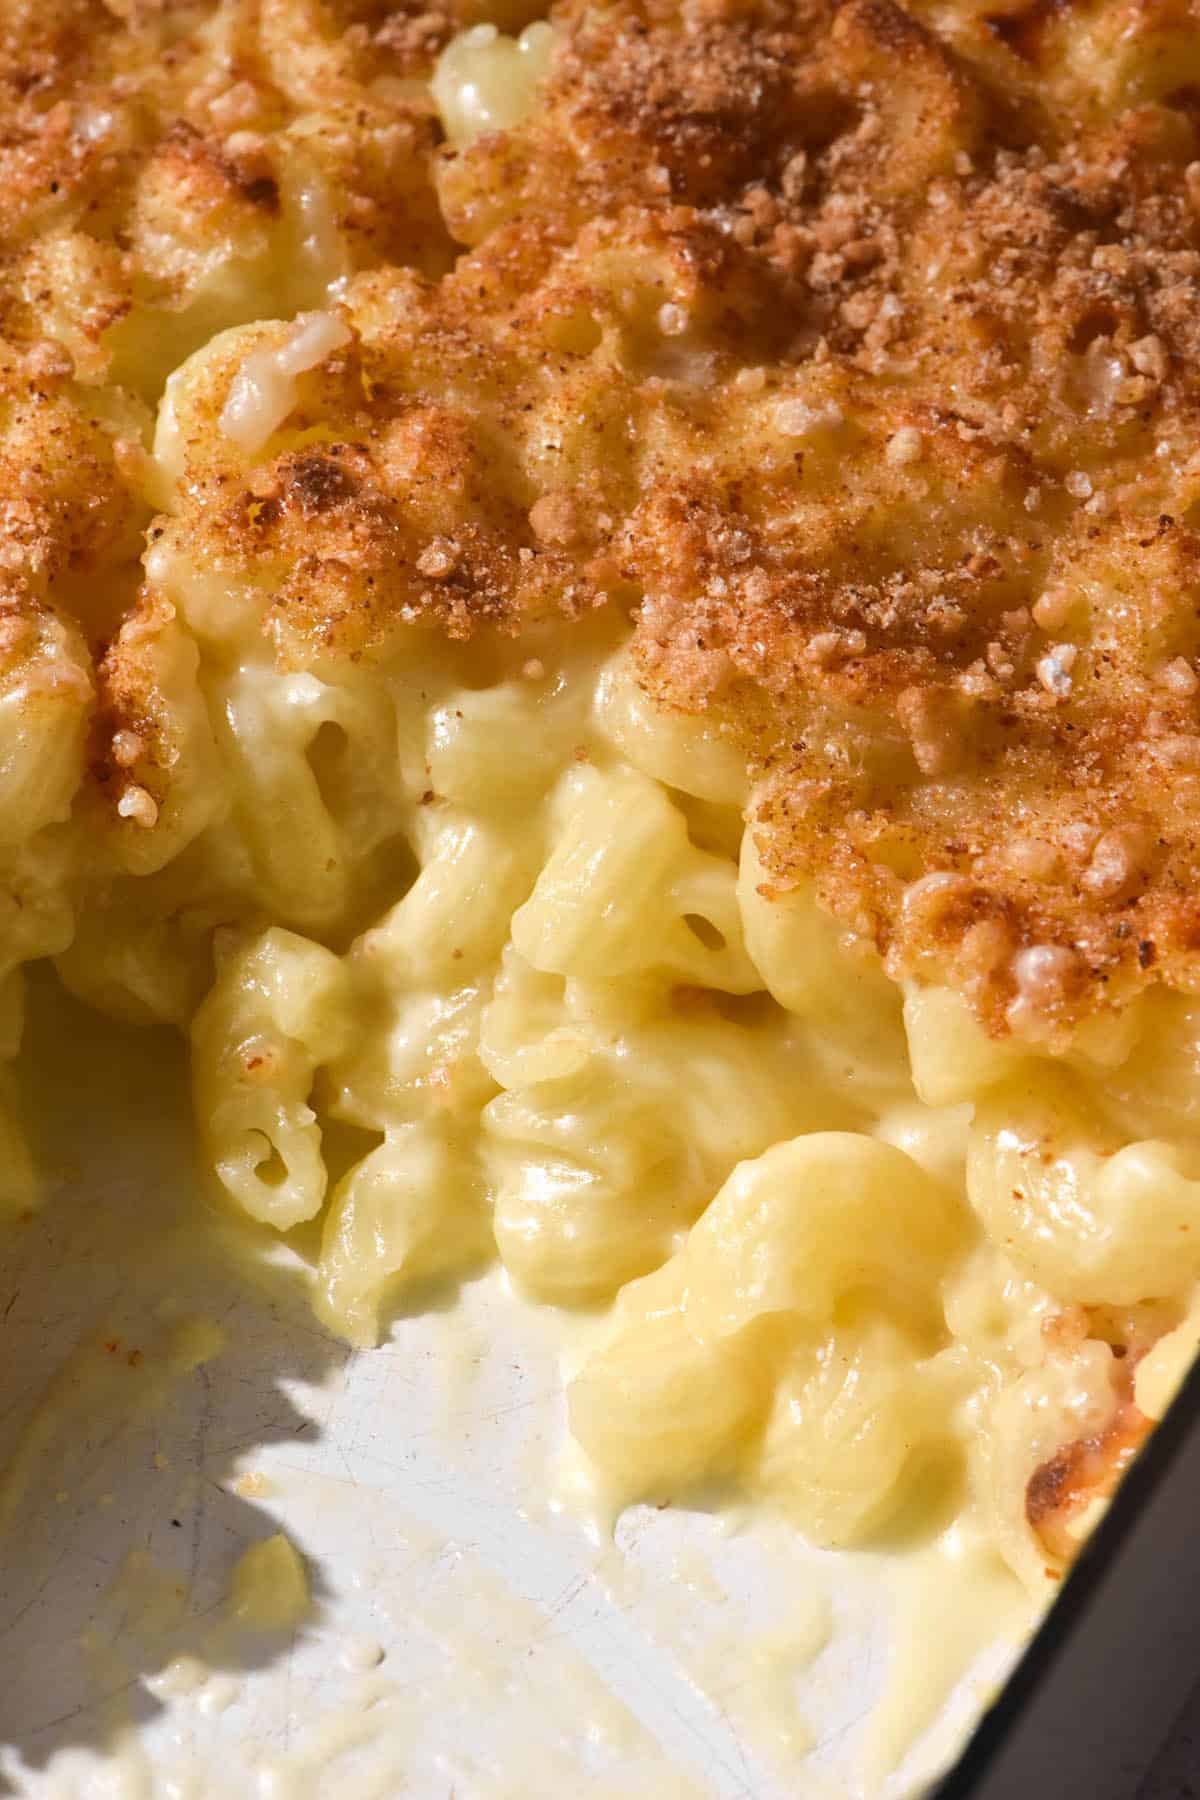 A close up of a mac and cheese bake in a white baking dish. Some of the bake has been removed, revealing the creamy mac and cheese underneath the golden brown topping.